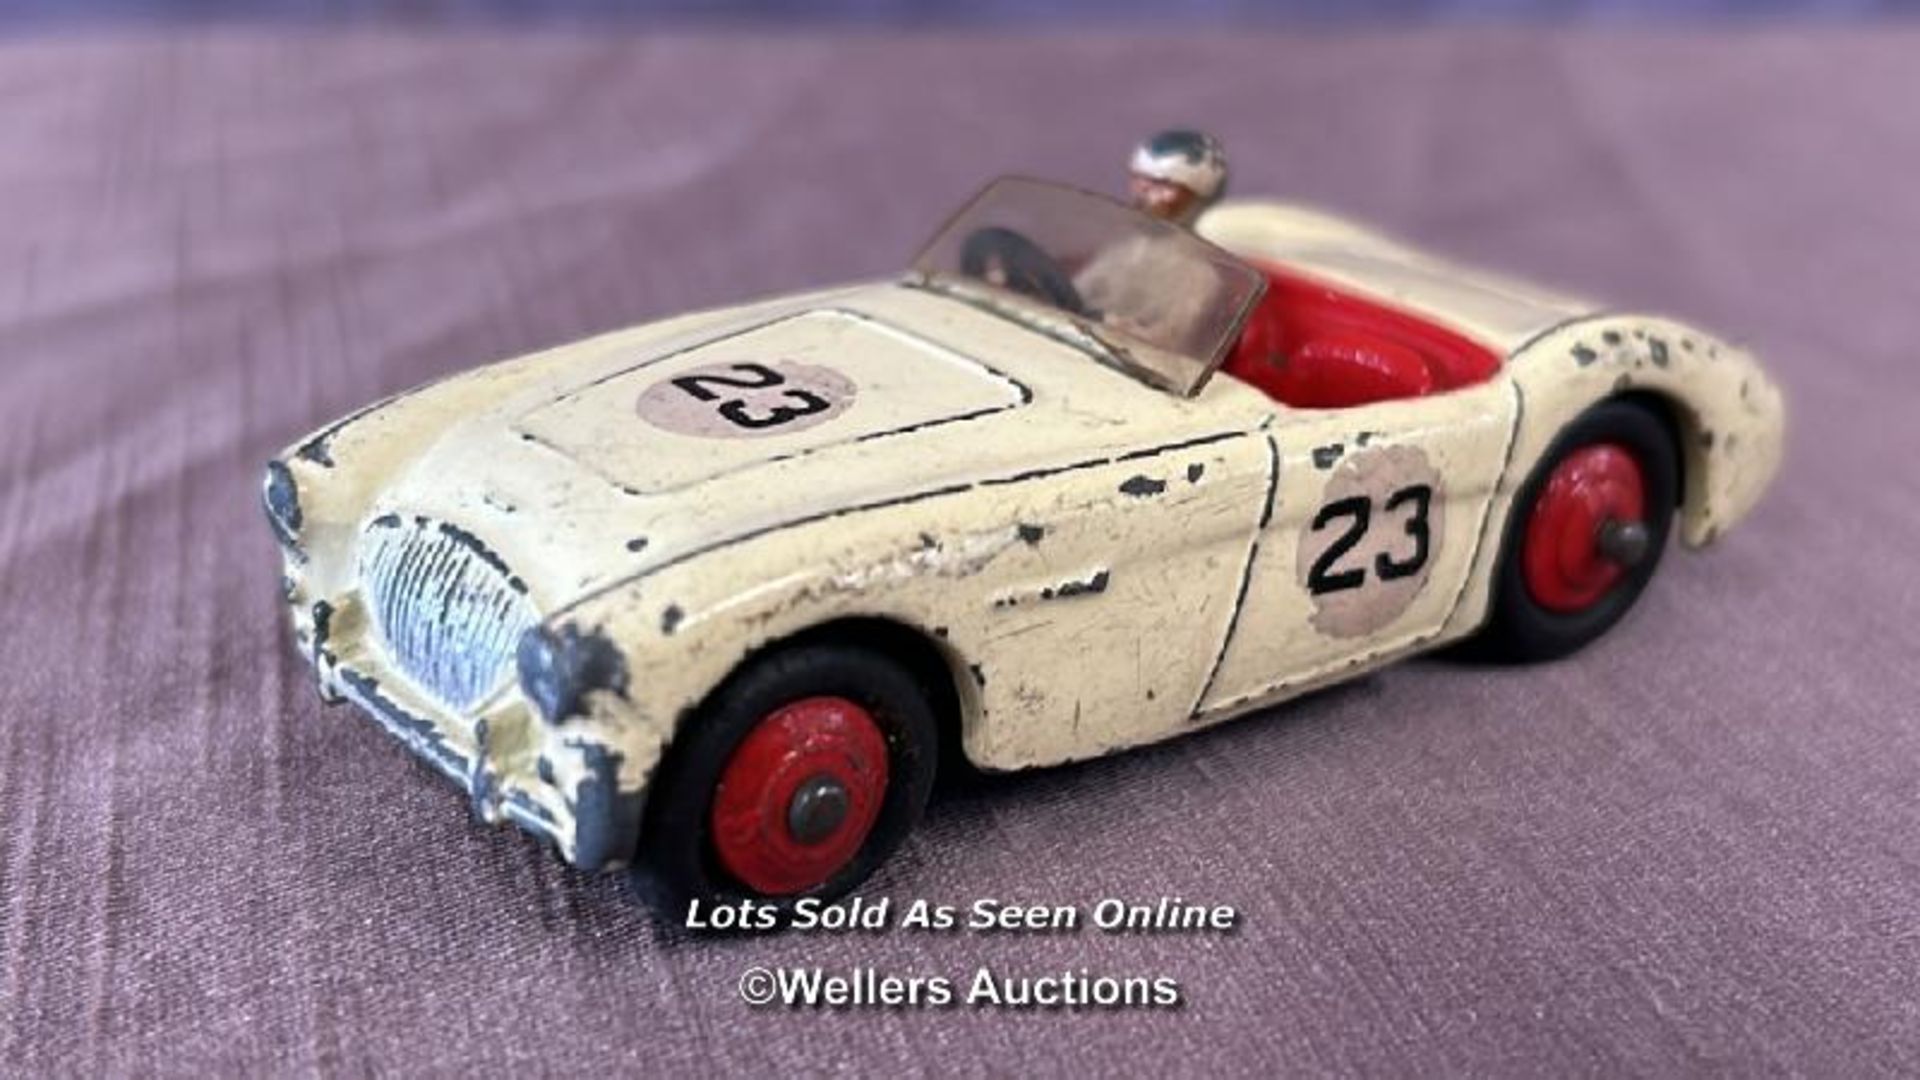 THREE DINKY DIE CAST RACING CARS INCLUDING SUNBEAM ALPINE NO. 107, AUSTIN HEALEY NO. 109 AND ASTON - Image 6 of 7